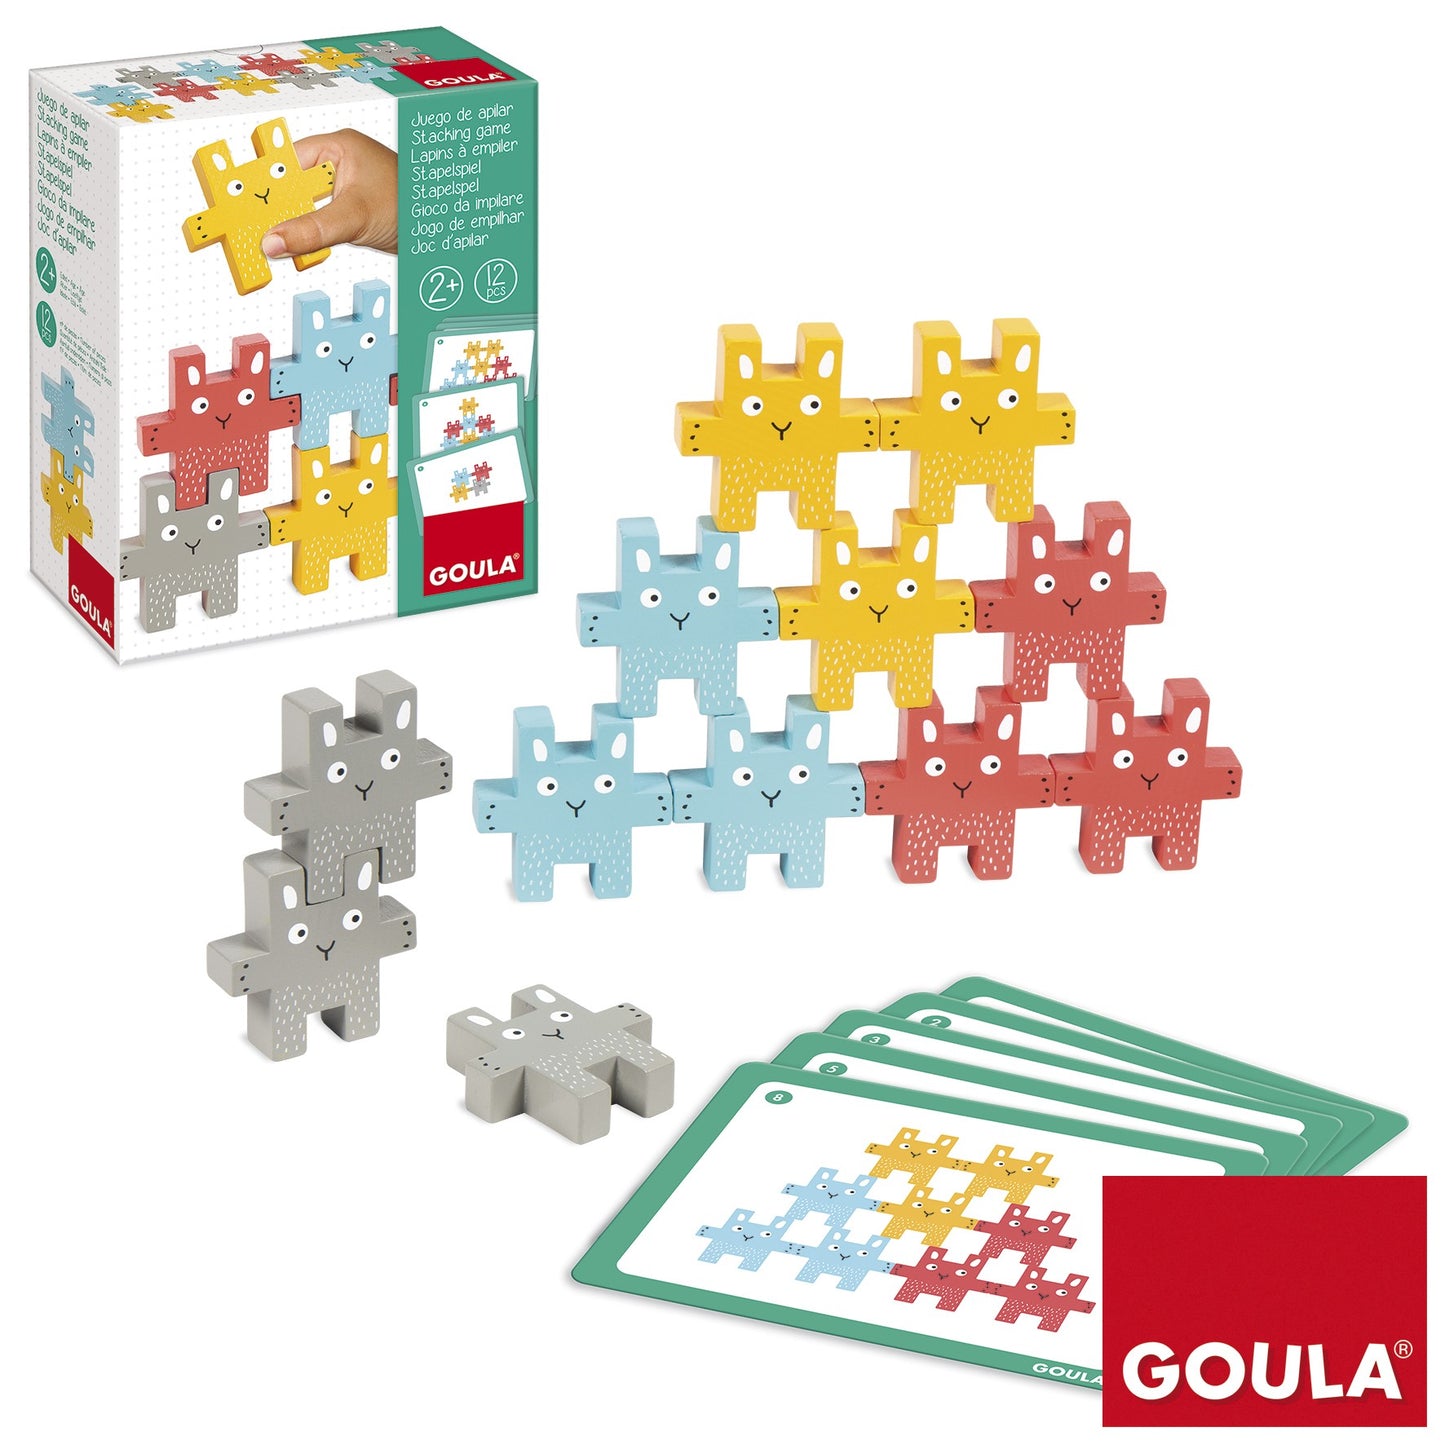 Goula Stacking Game Baby Rabbit Color and Number Matching & Sorting